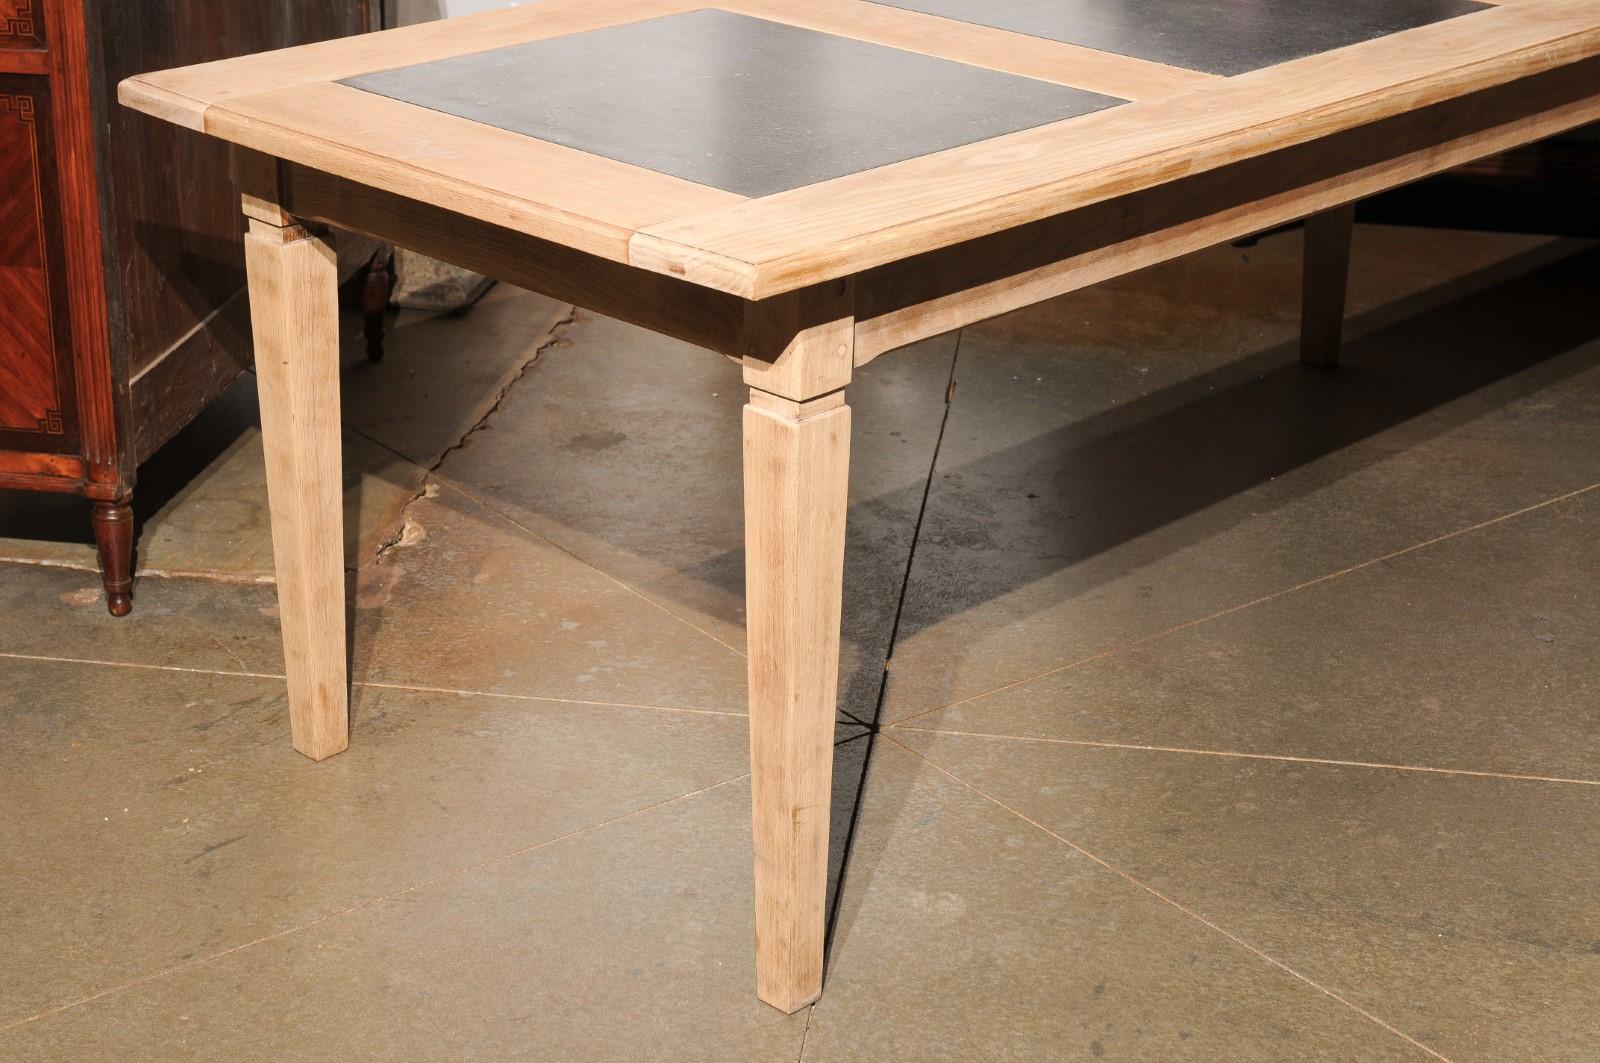 Southern French Midcentury Natural Oak Dining Table with Fossil Black Marble Top For Sale 10